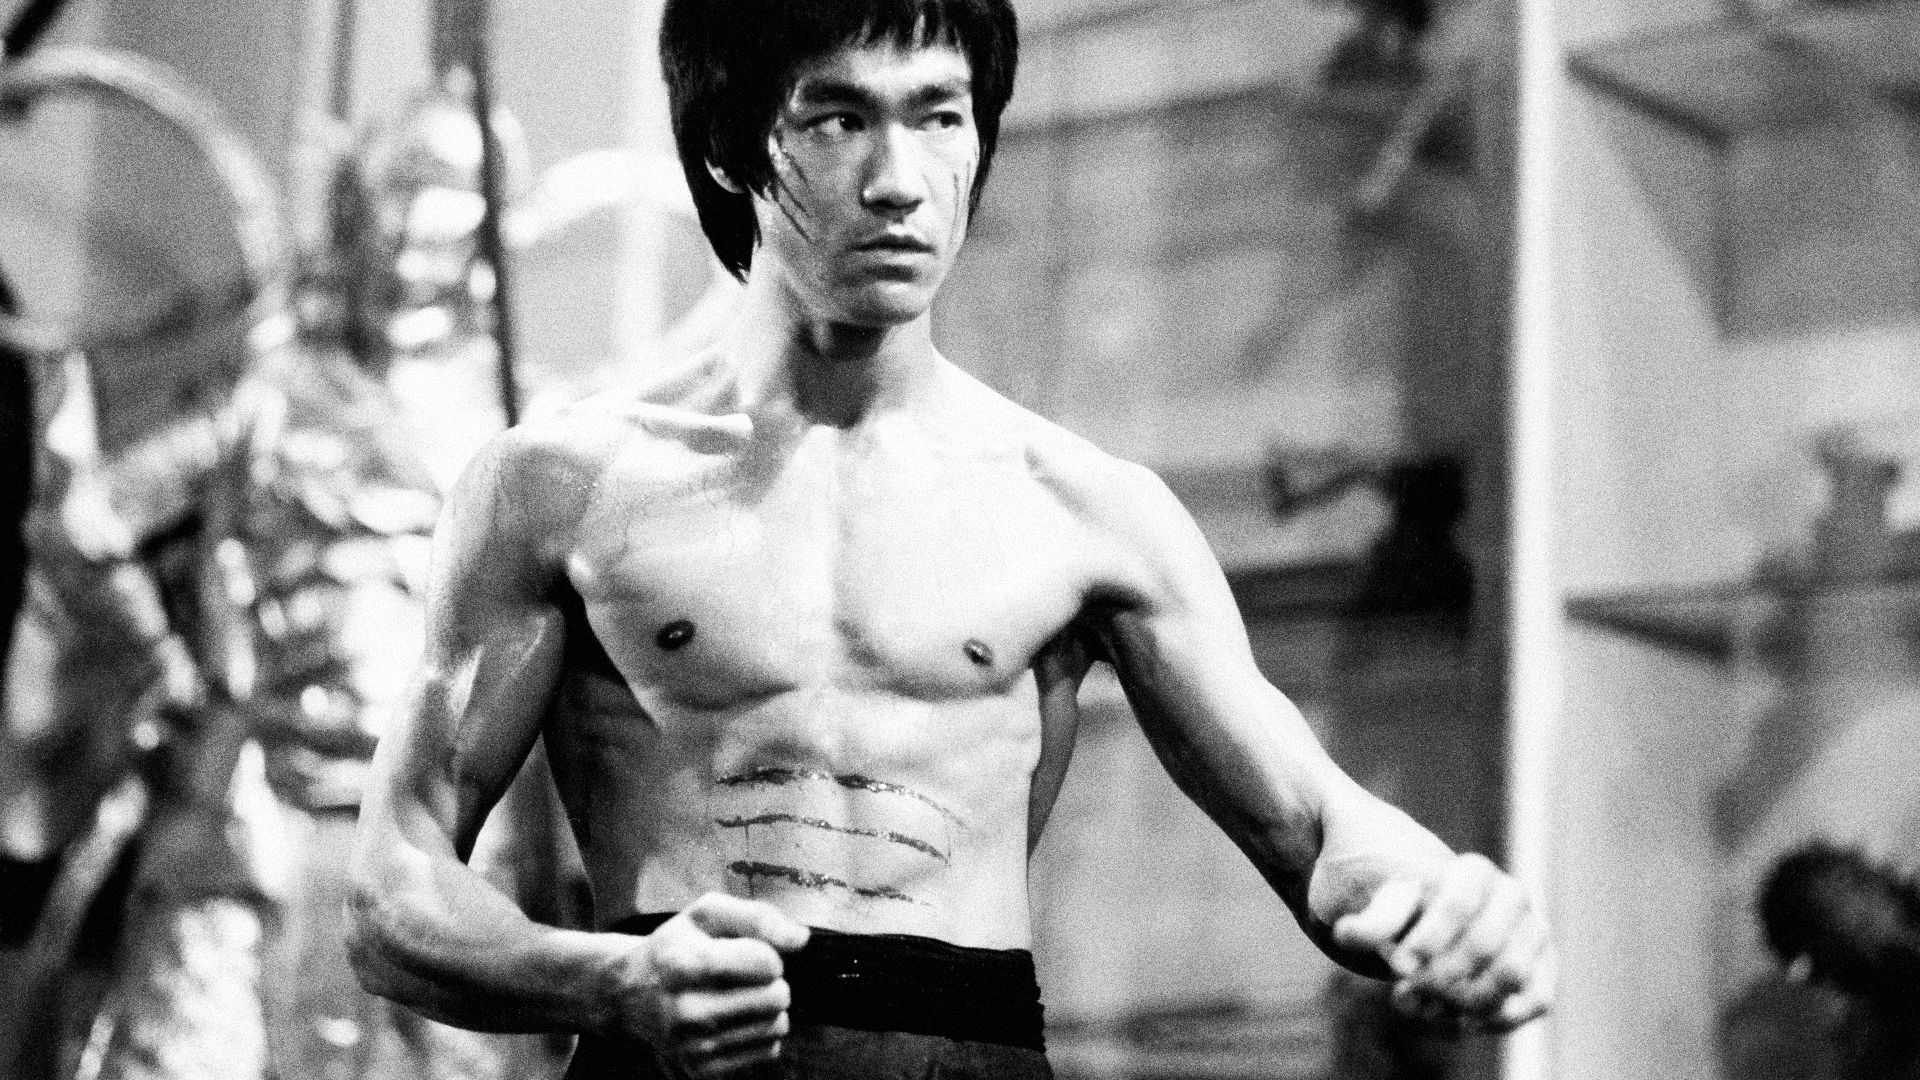 Bruce Lee Ripped